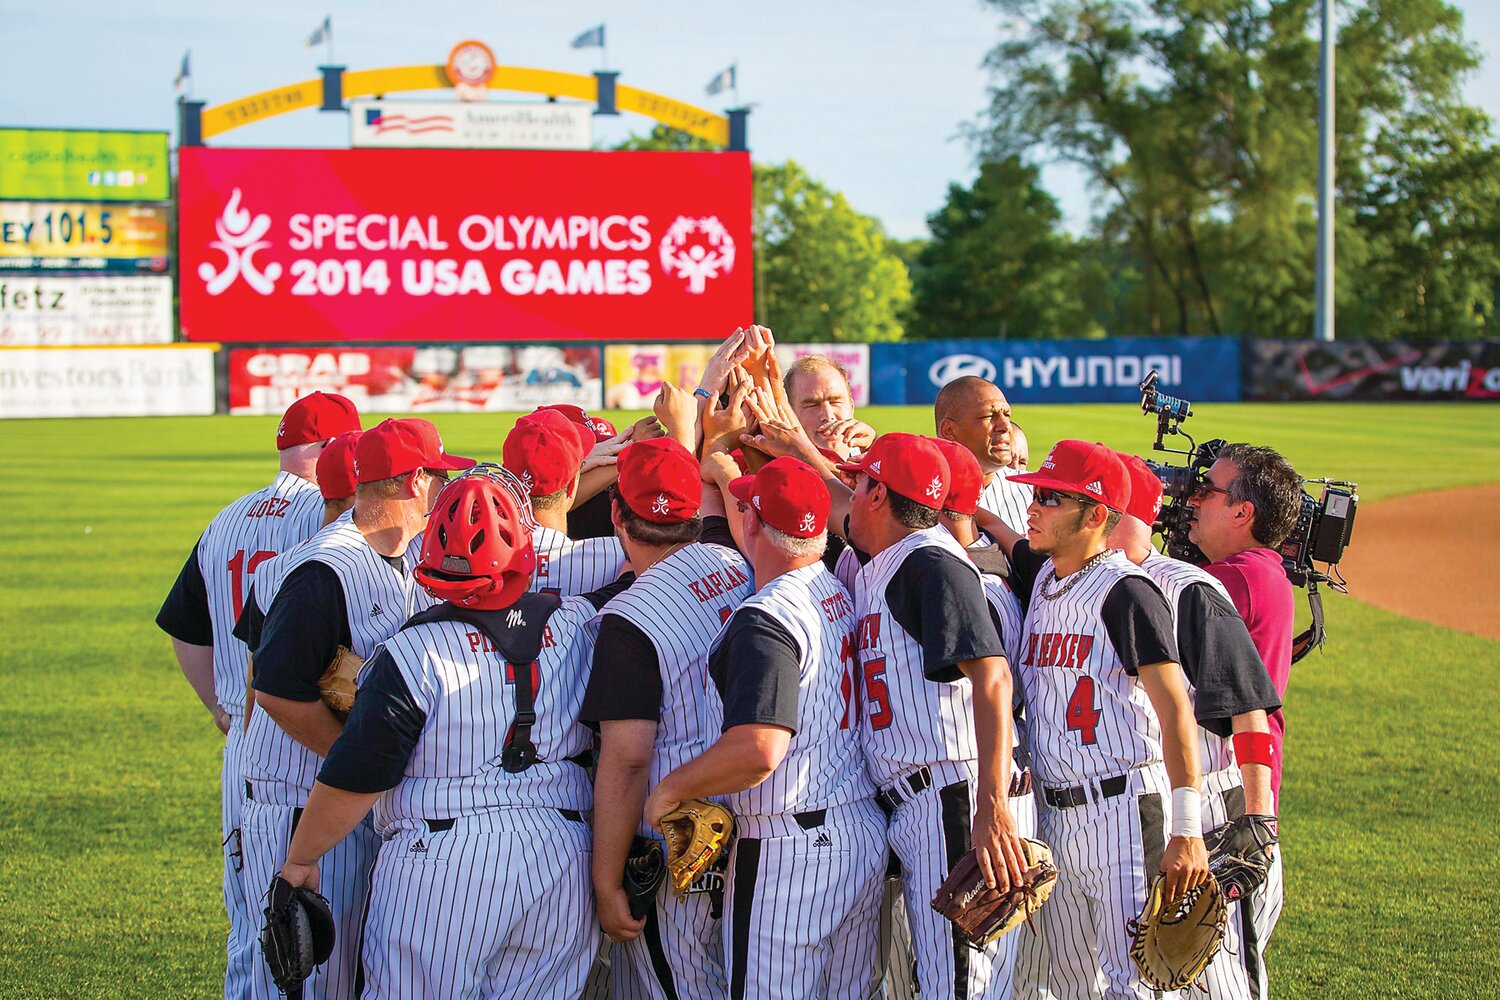 Tony Vlahovic helped form the first Special Olympics baseball team in the region, leading a team based in New Jersey to a national championship in 2014.